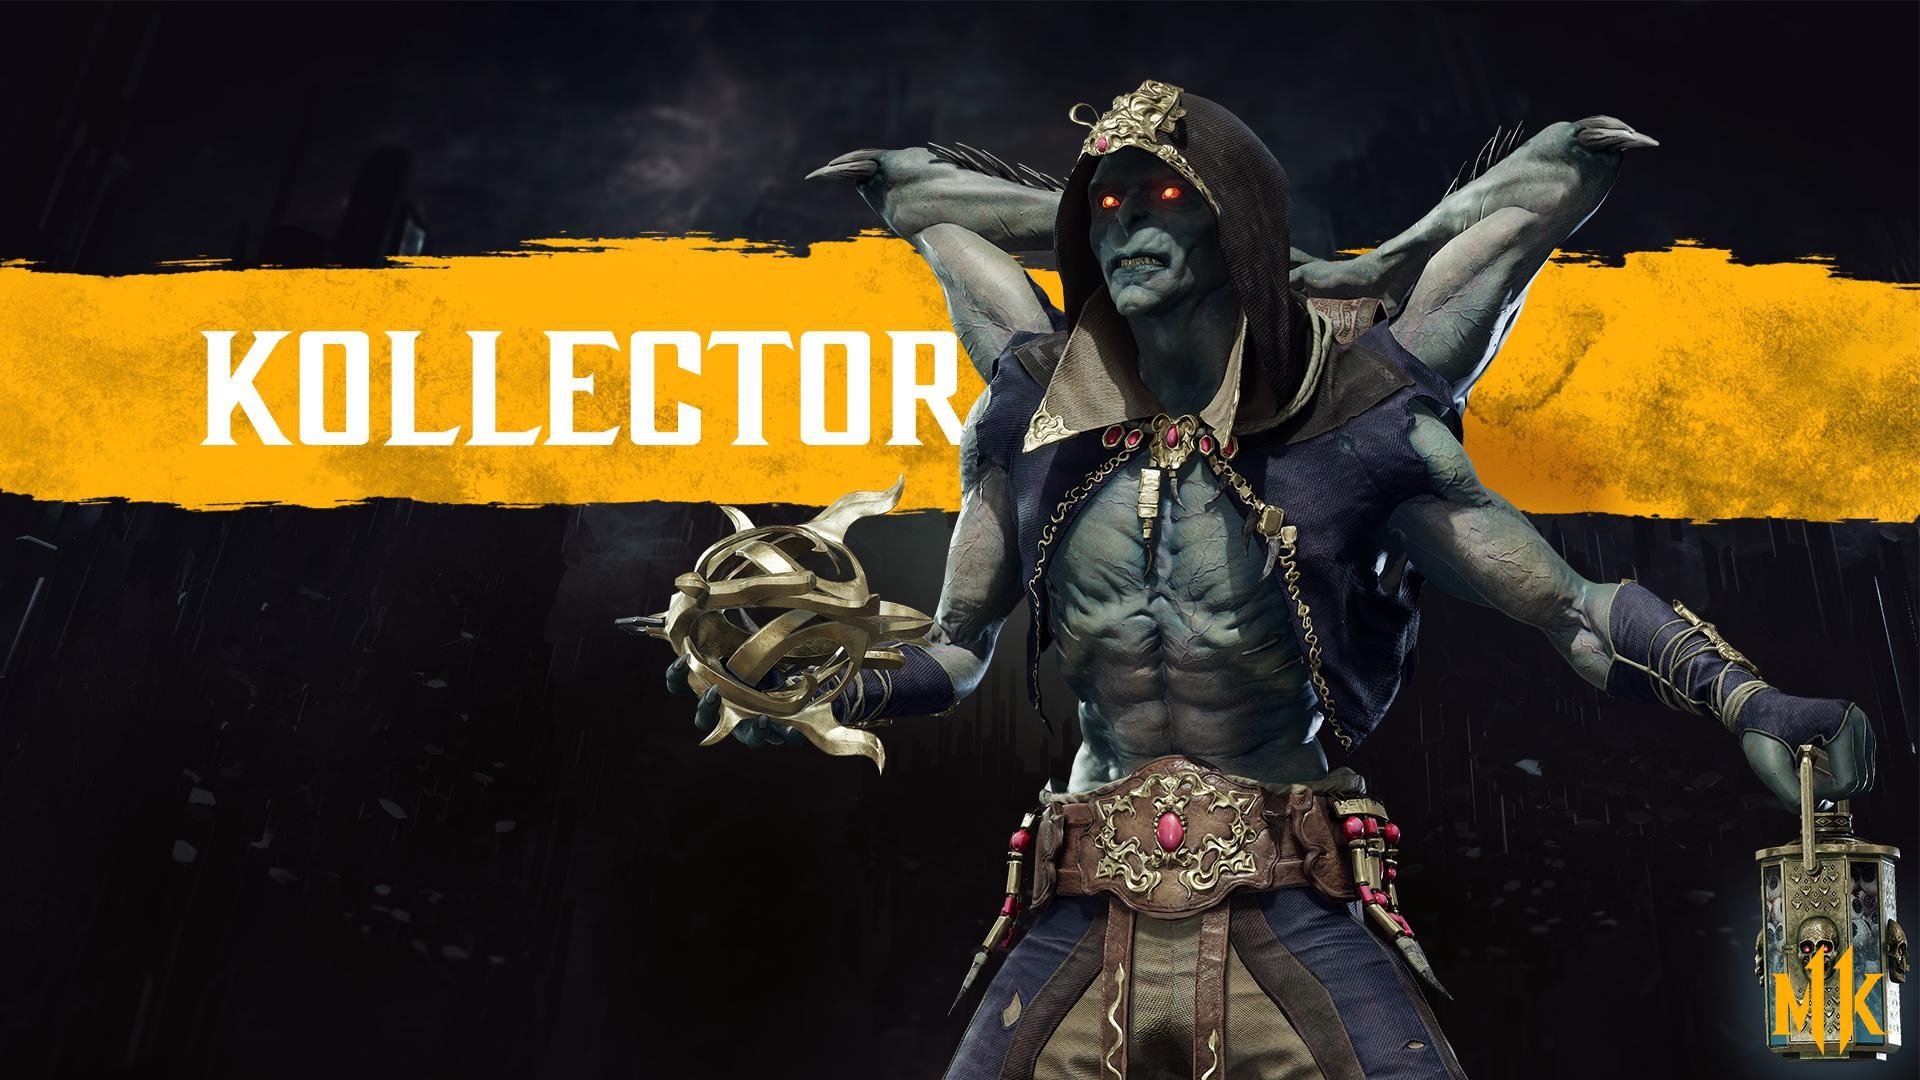 Kollector Mortal Kombat HD Wallpapers and Backgrounds 1920x1080